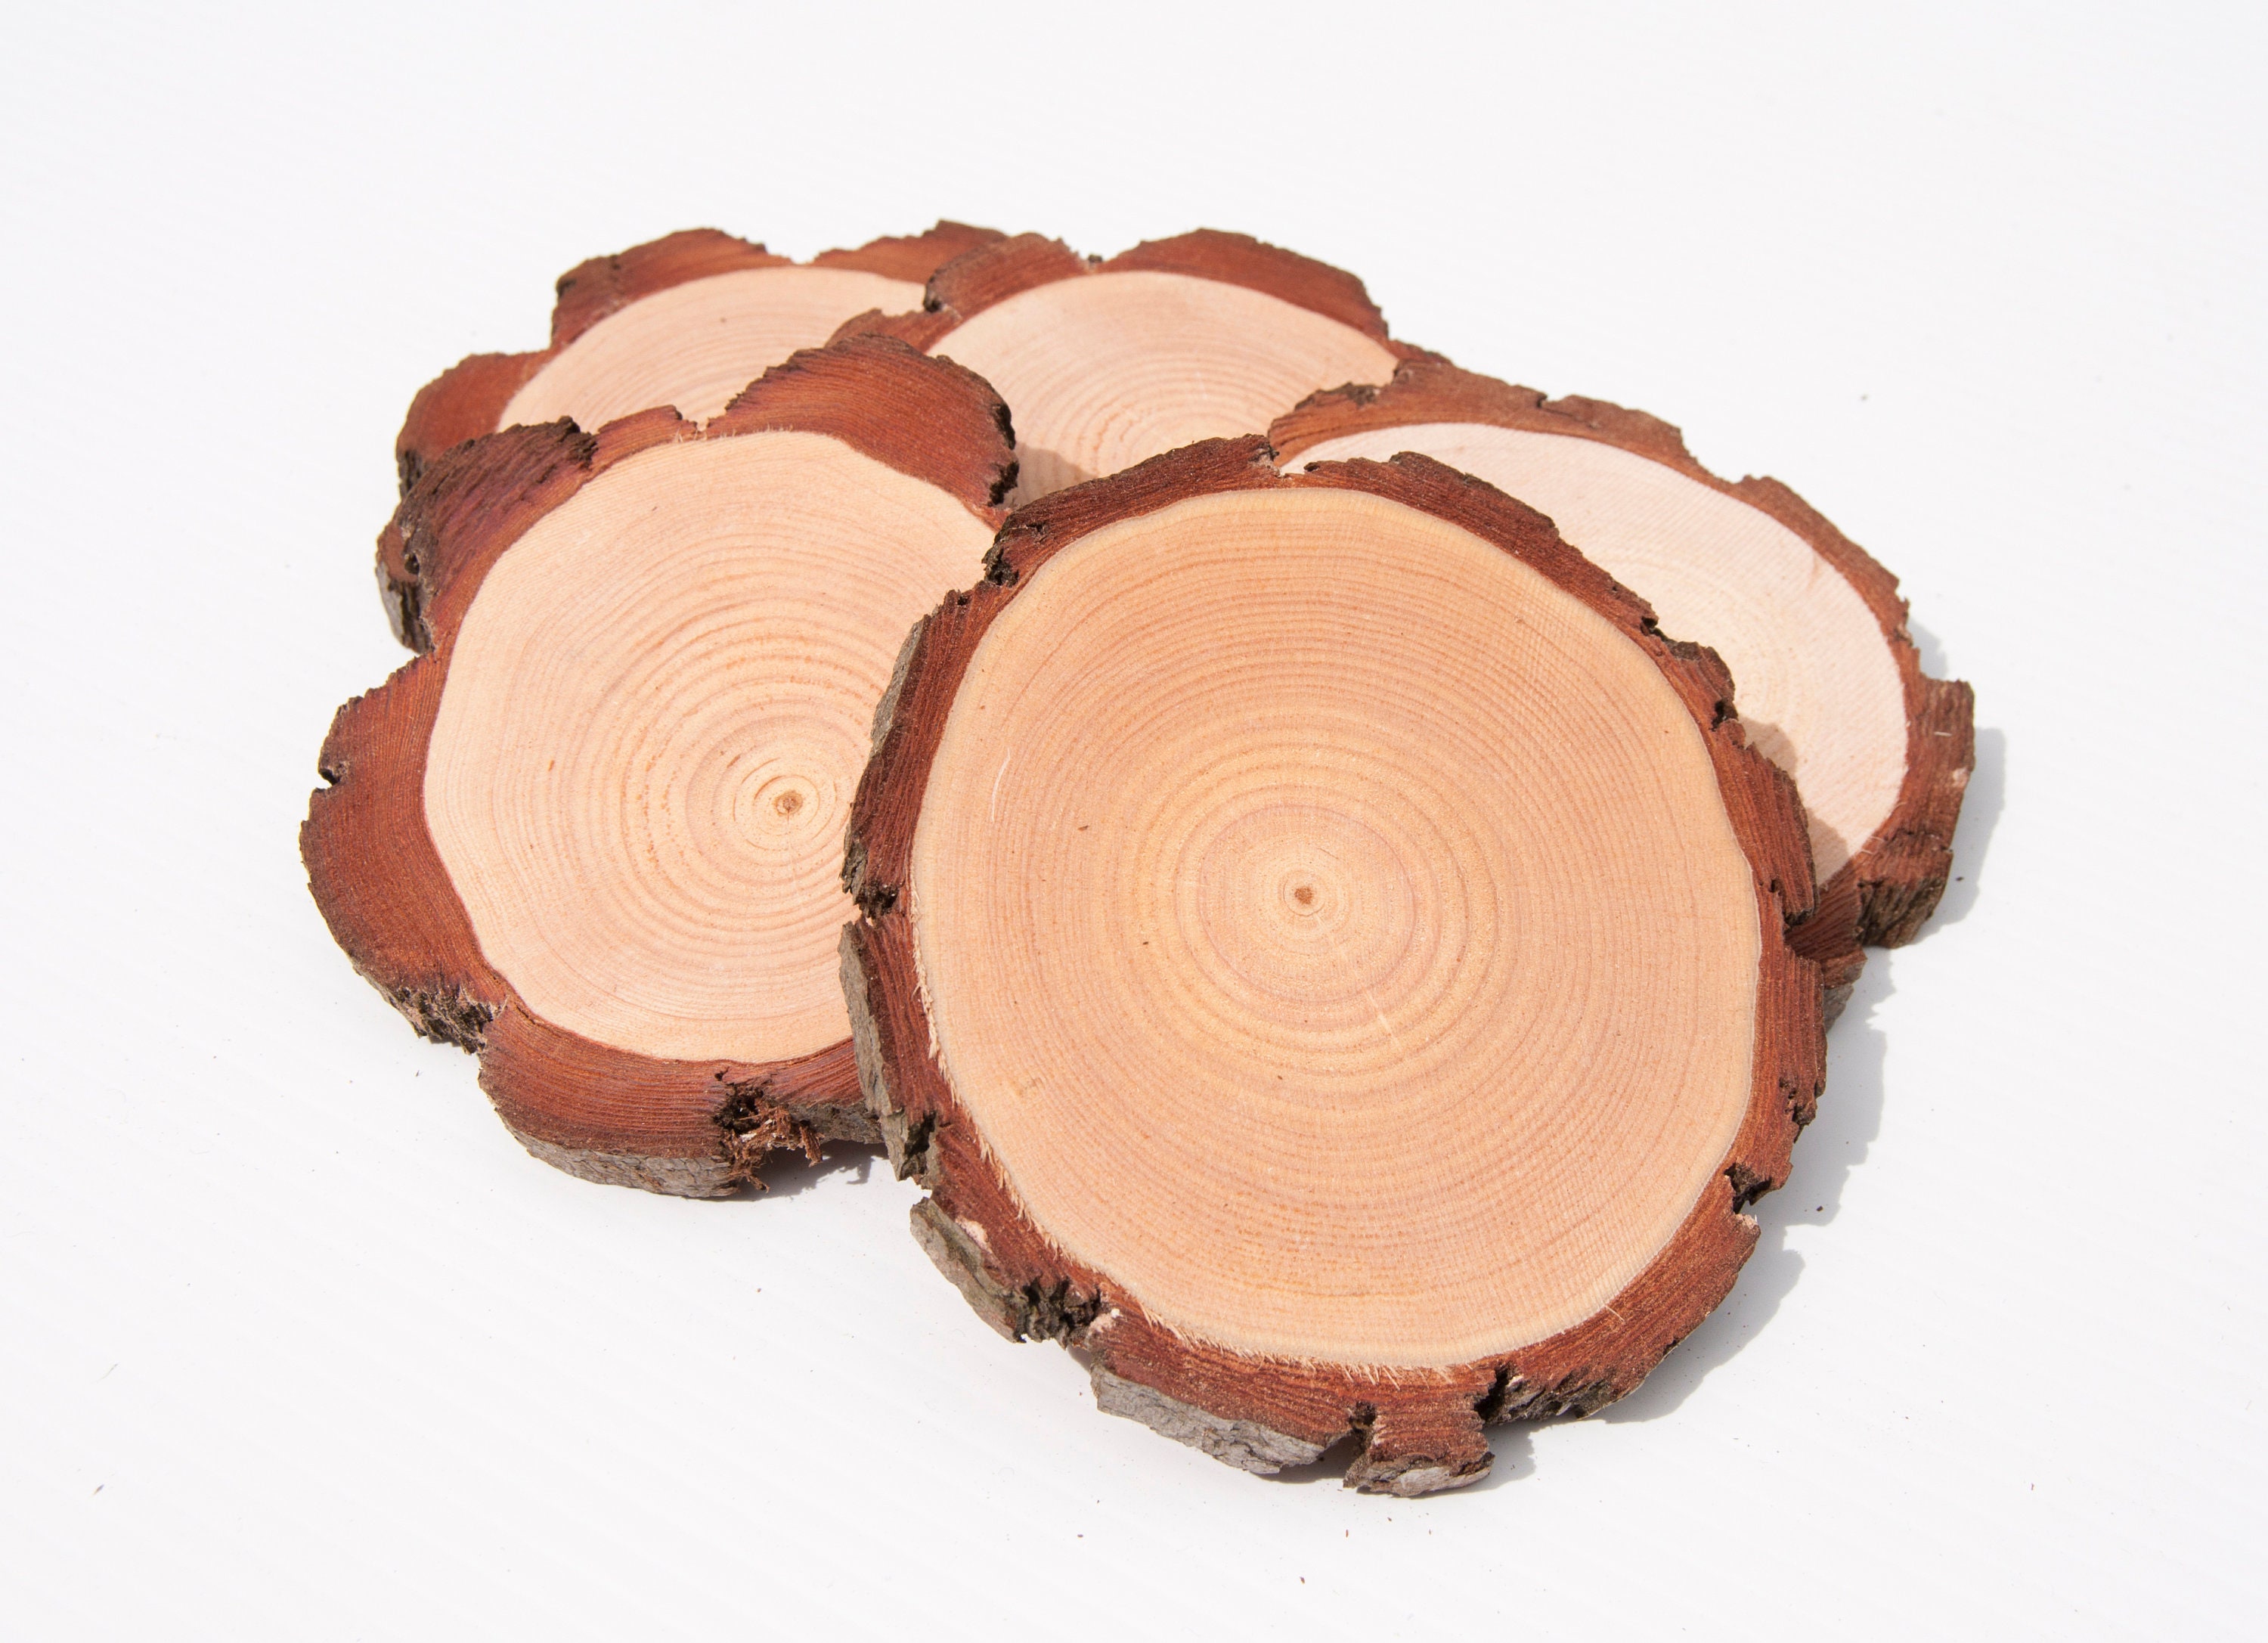 10 Pcs 4.2-4.7 Inch Natural Wood Slices, Round Wood Christmas Ornaments,  Unfinished Wood Rounds Craft Wood Kit, Round Wood Discs for Crafts 